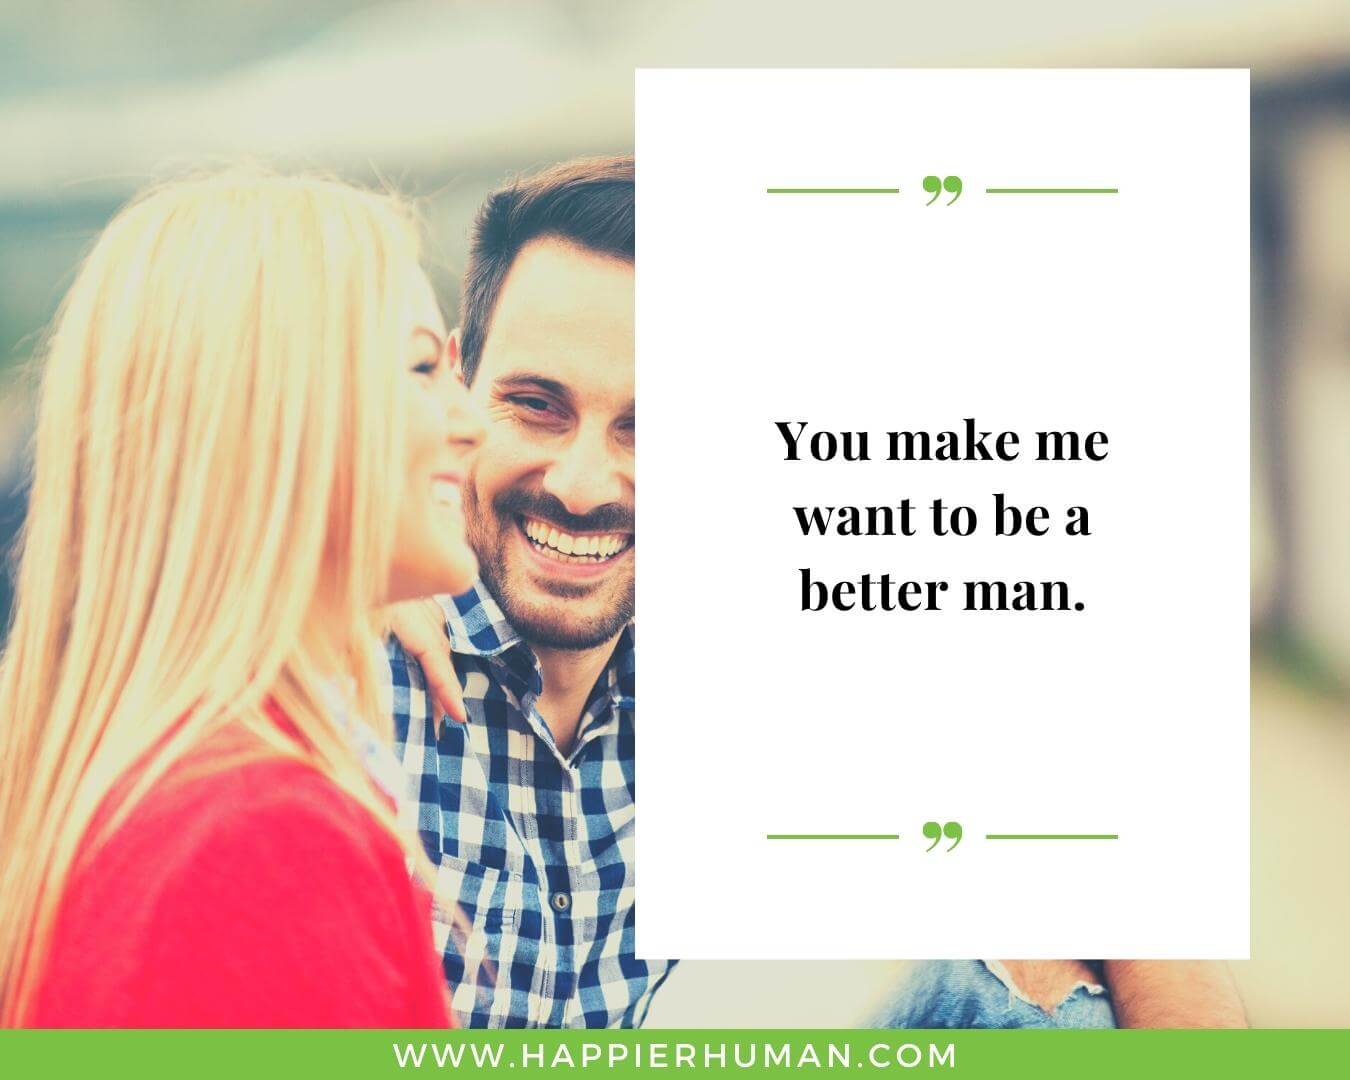 Unconditional Love Quotes for Her - “You make me want to be a better man.”